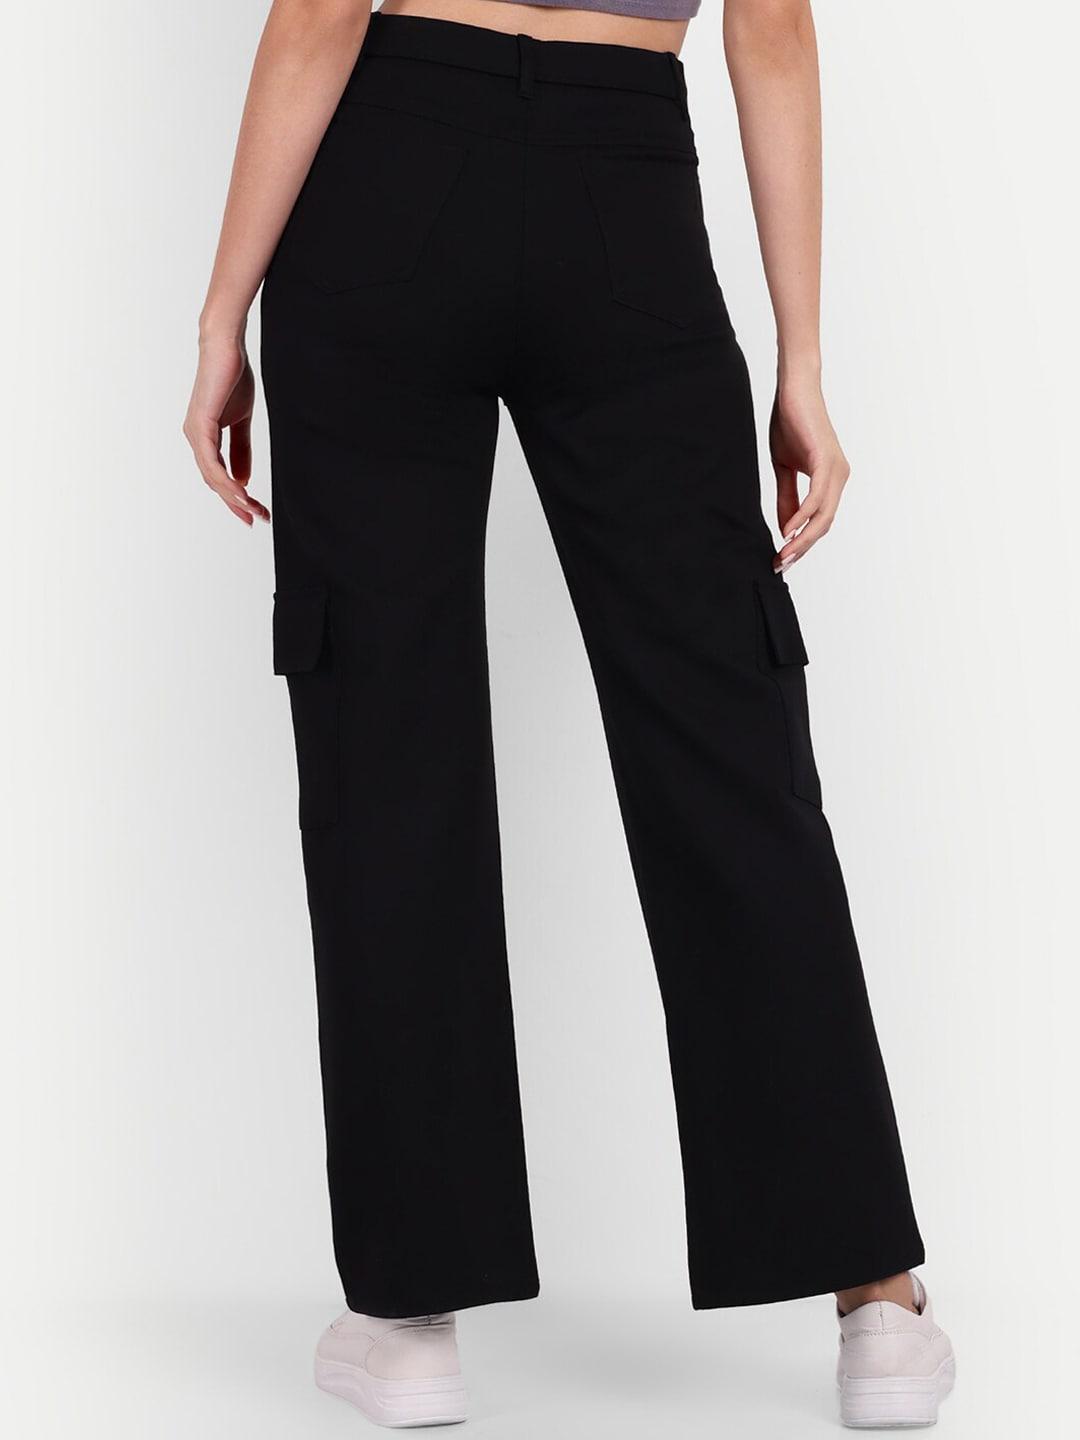 Next One Women Black Smart High-Rise Easy Wash Trousers